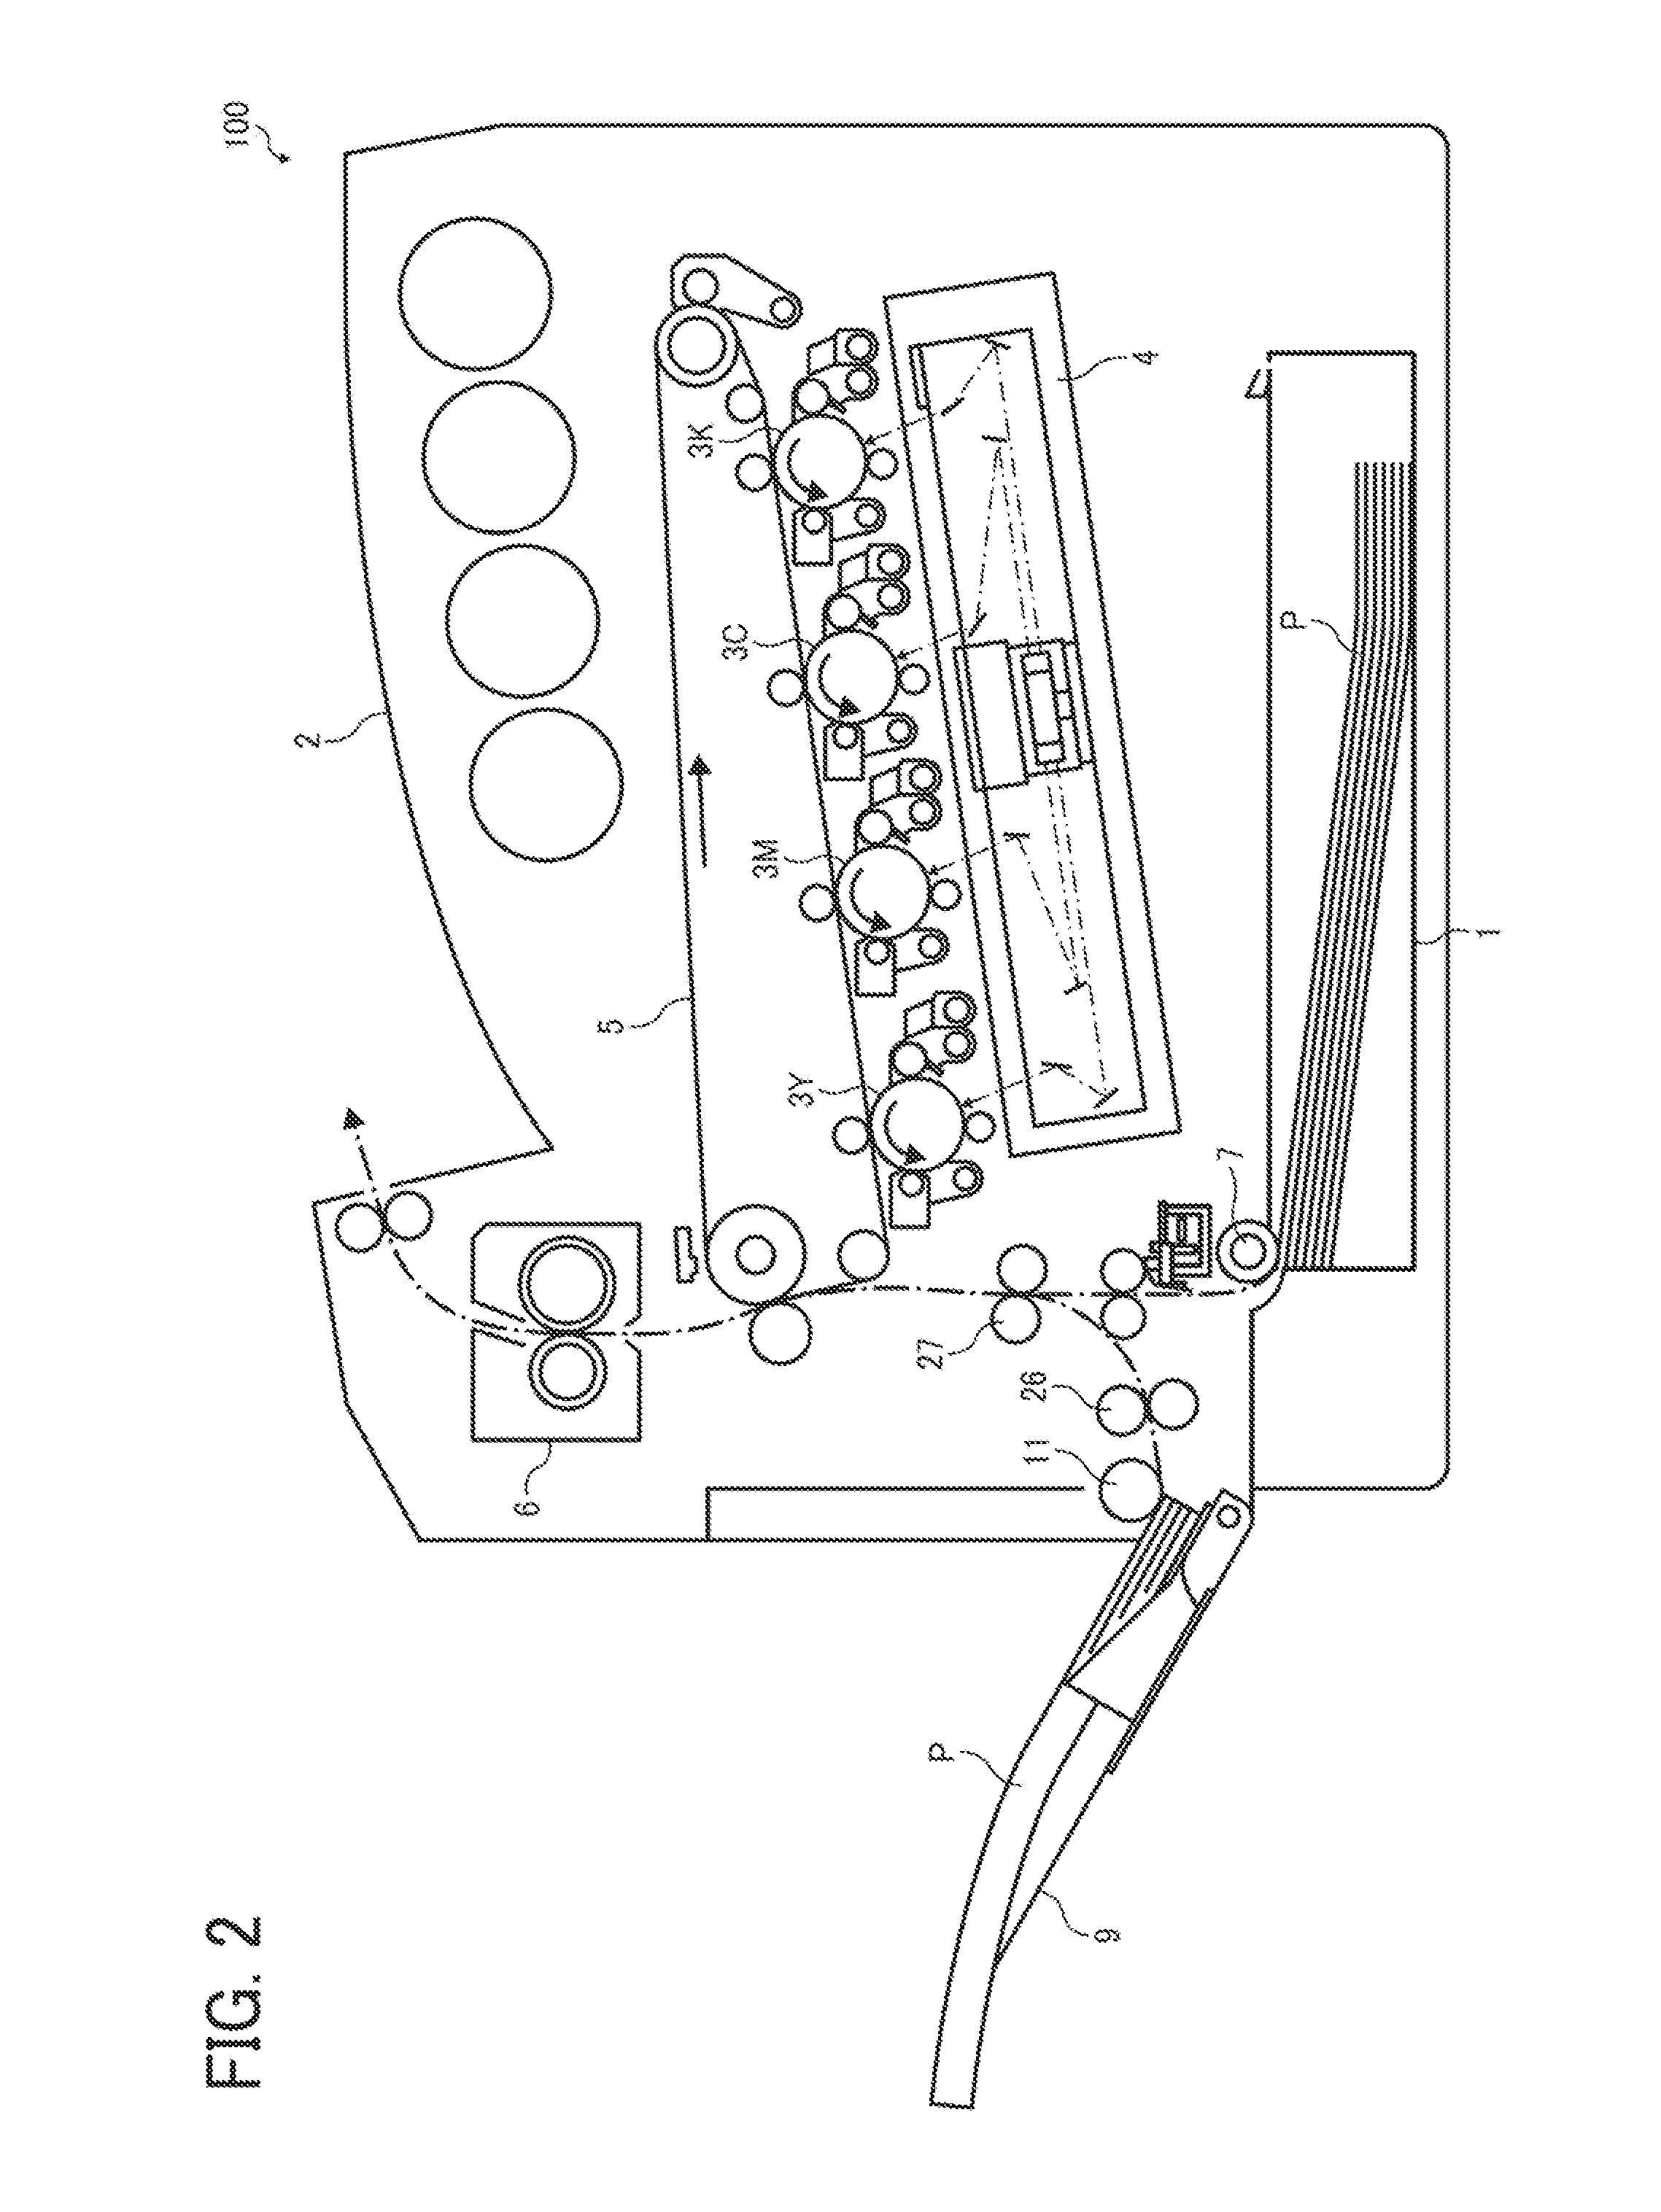 Sheet Feeder And Image Forming Apparatus Including Same